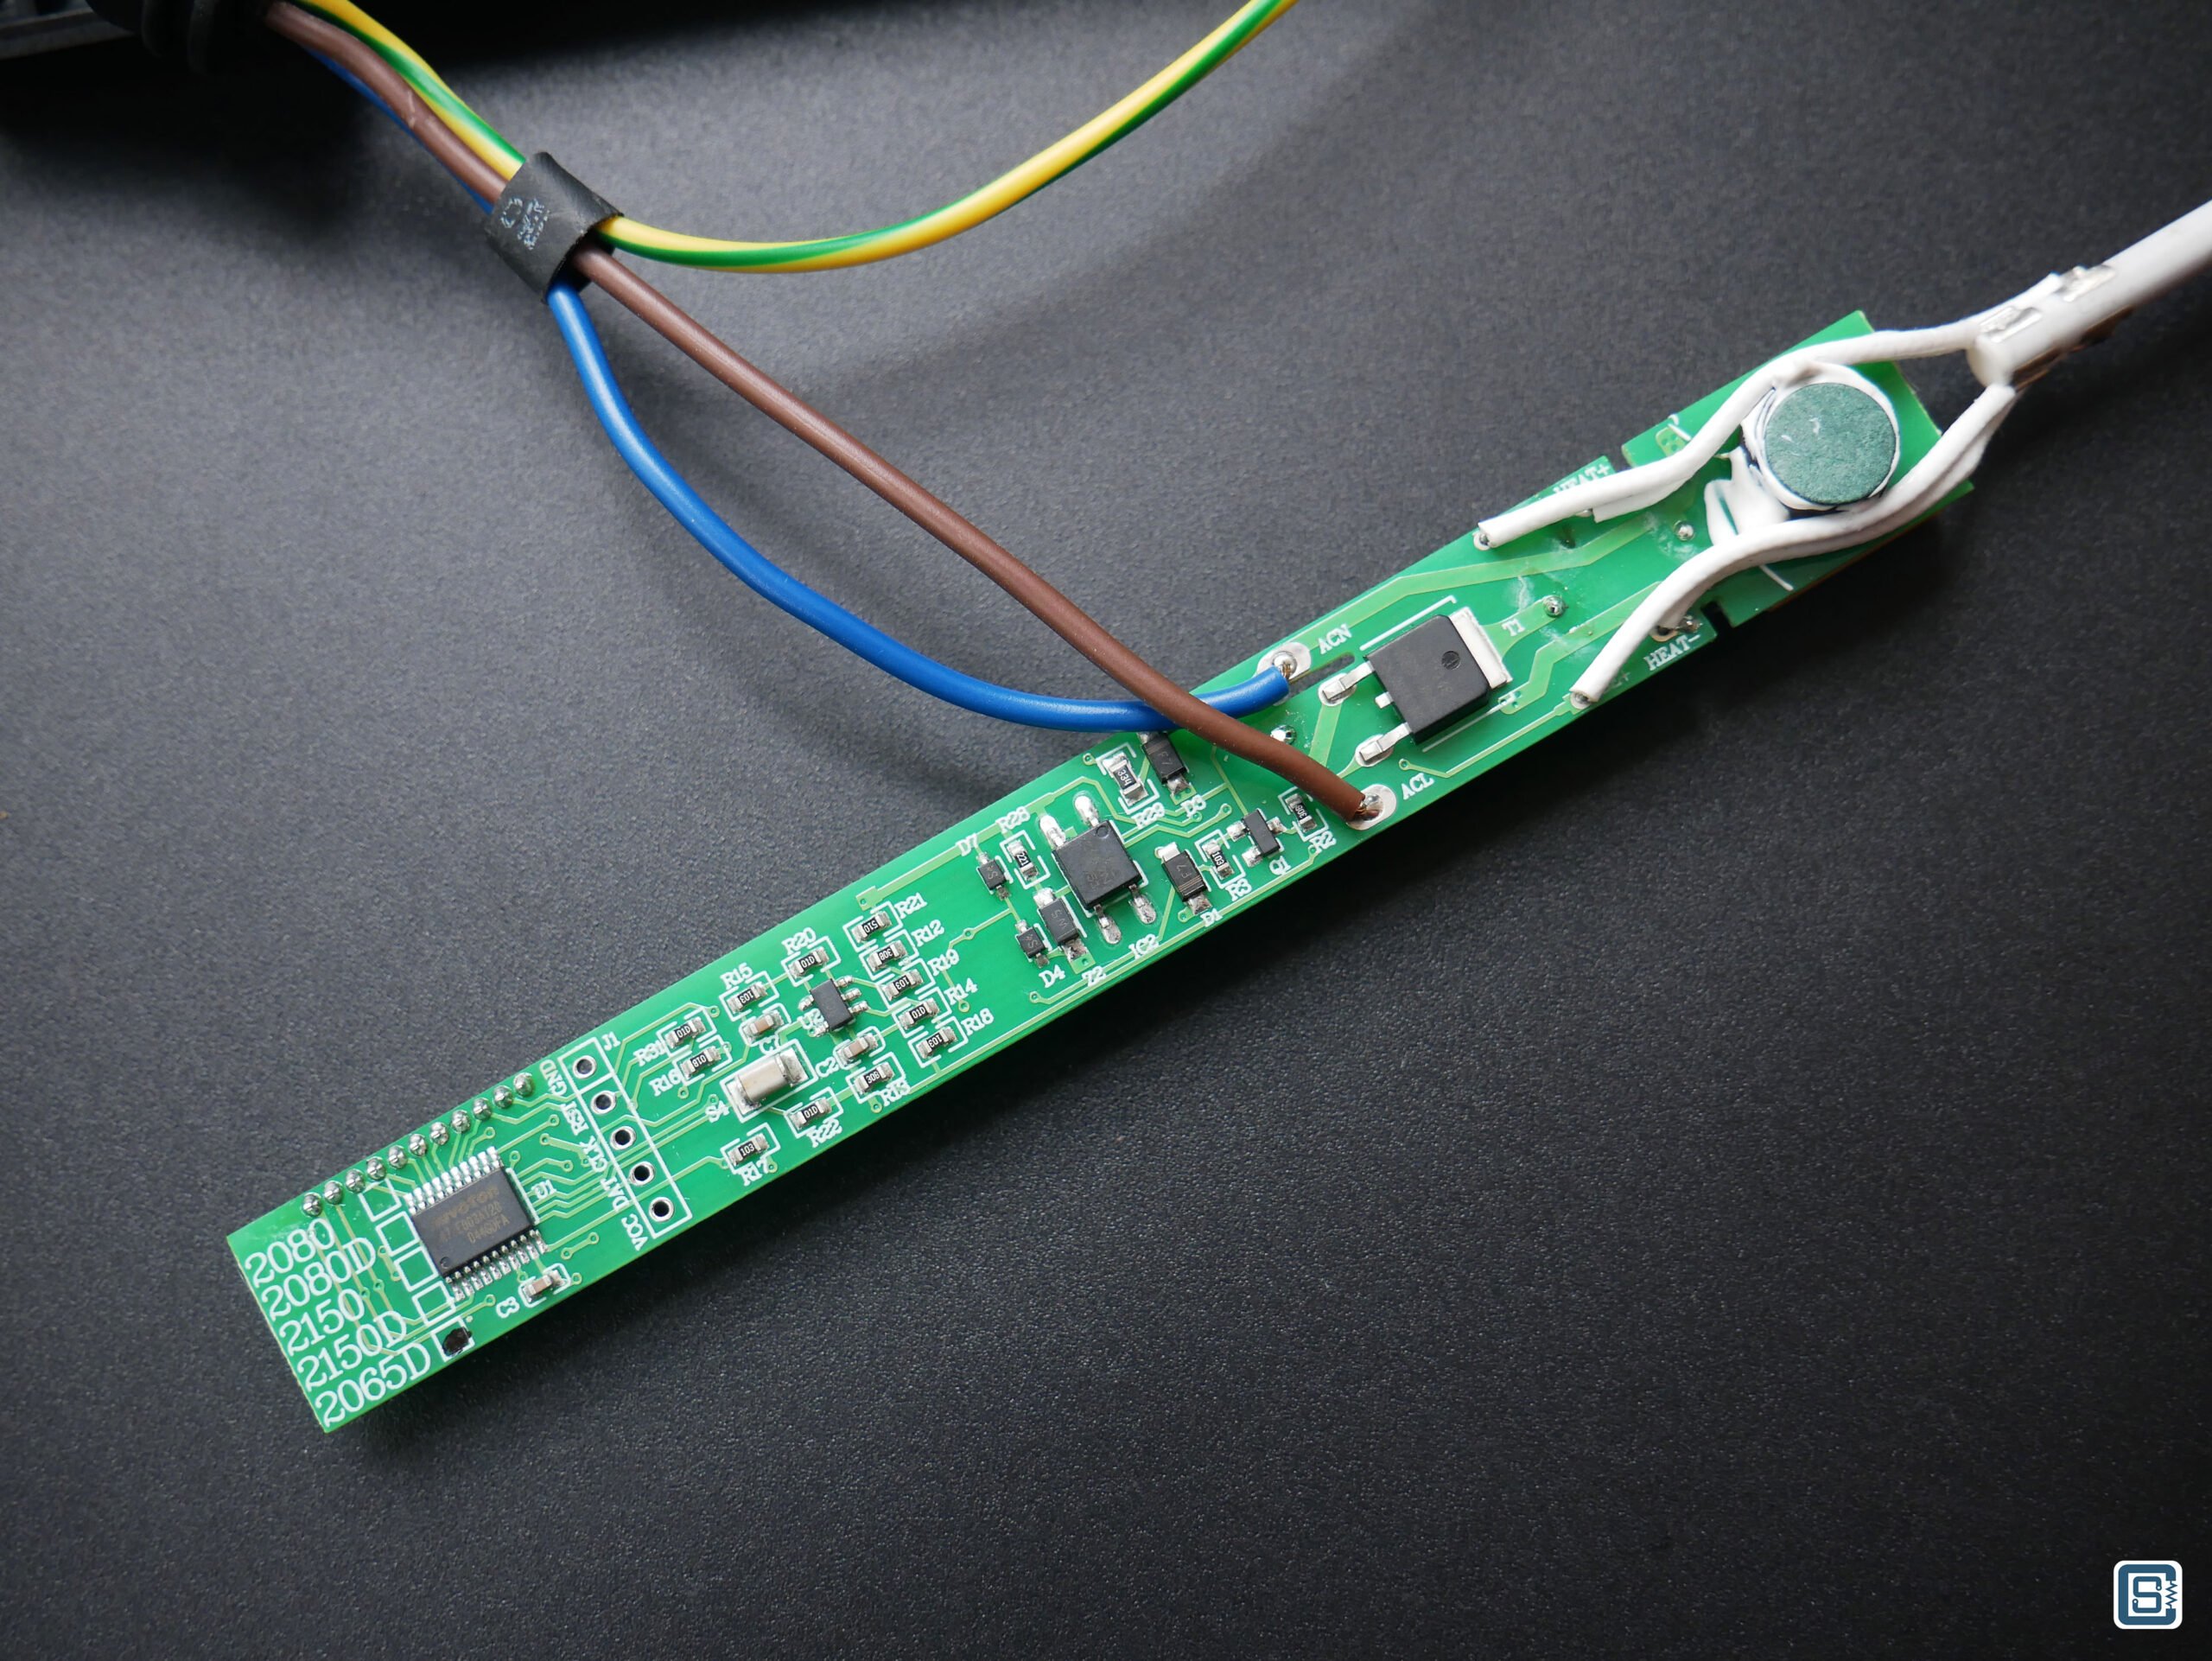 Atten-ST-2065D-Digital-Temperature-Controlled-Soldering-Iron-Review-and-Teardown-PCB-Bottom-Side-CIRCUITSTATE-Electronics-01